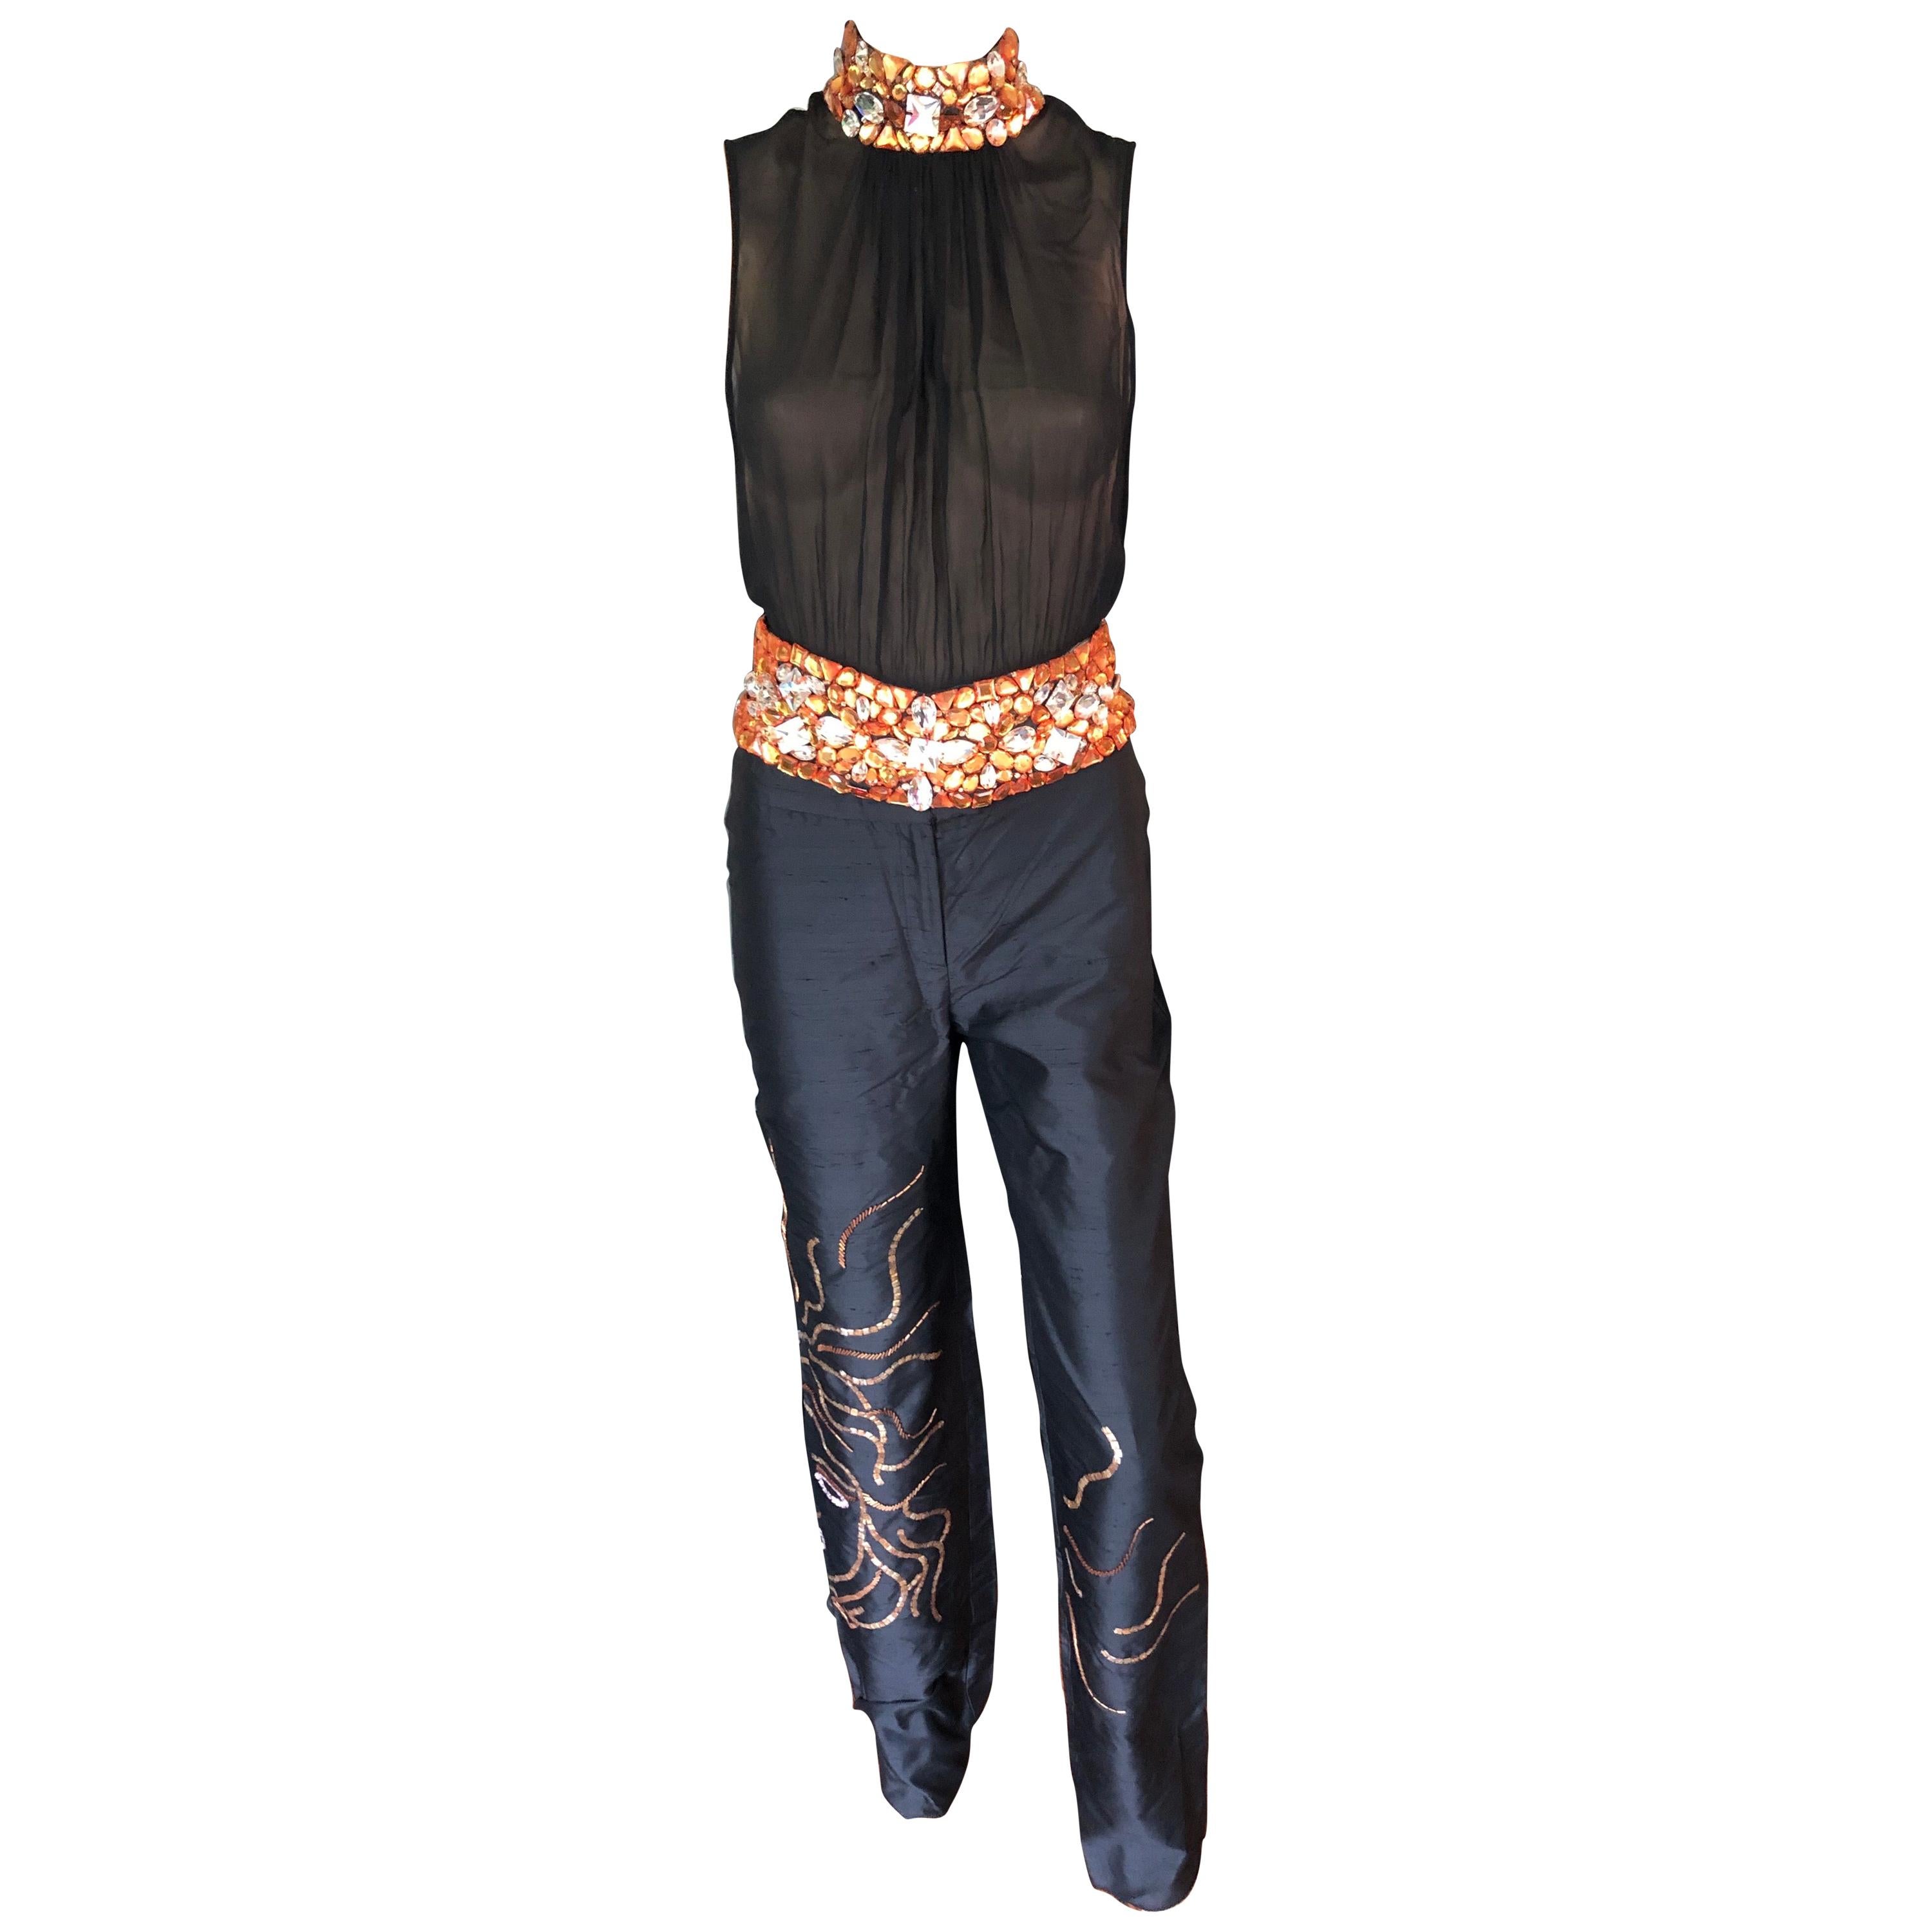 Gianni Versace Couture S/S 2000 Runway Embellished Sheer Top & Pants 2 Piece Set